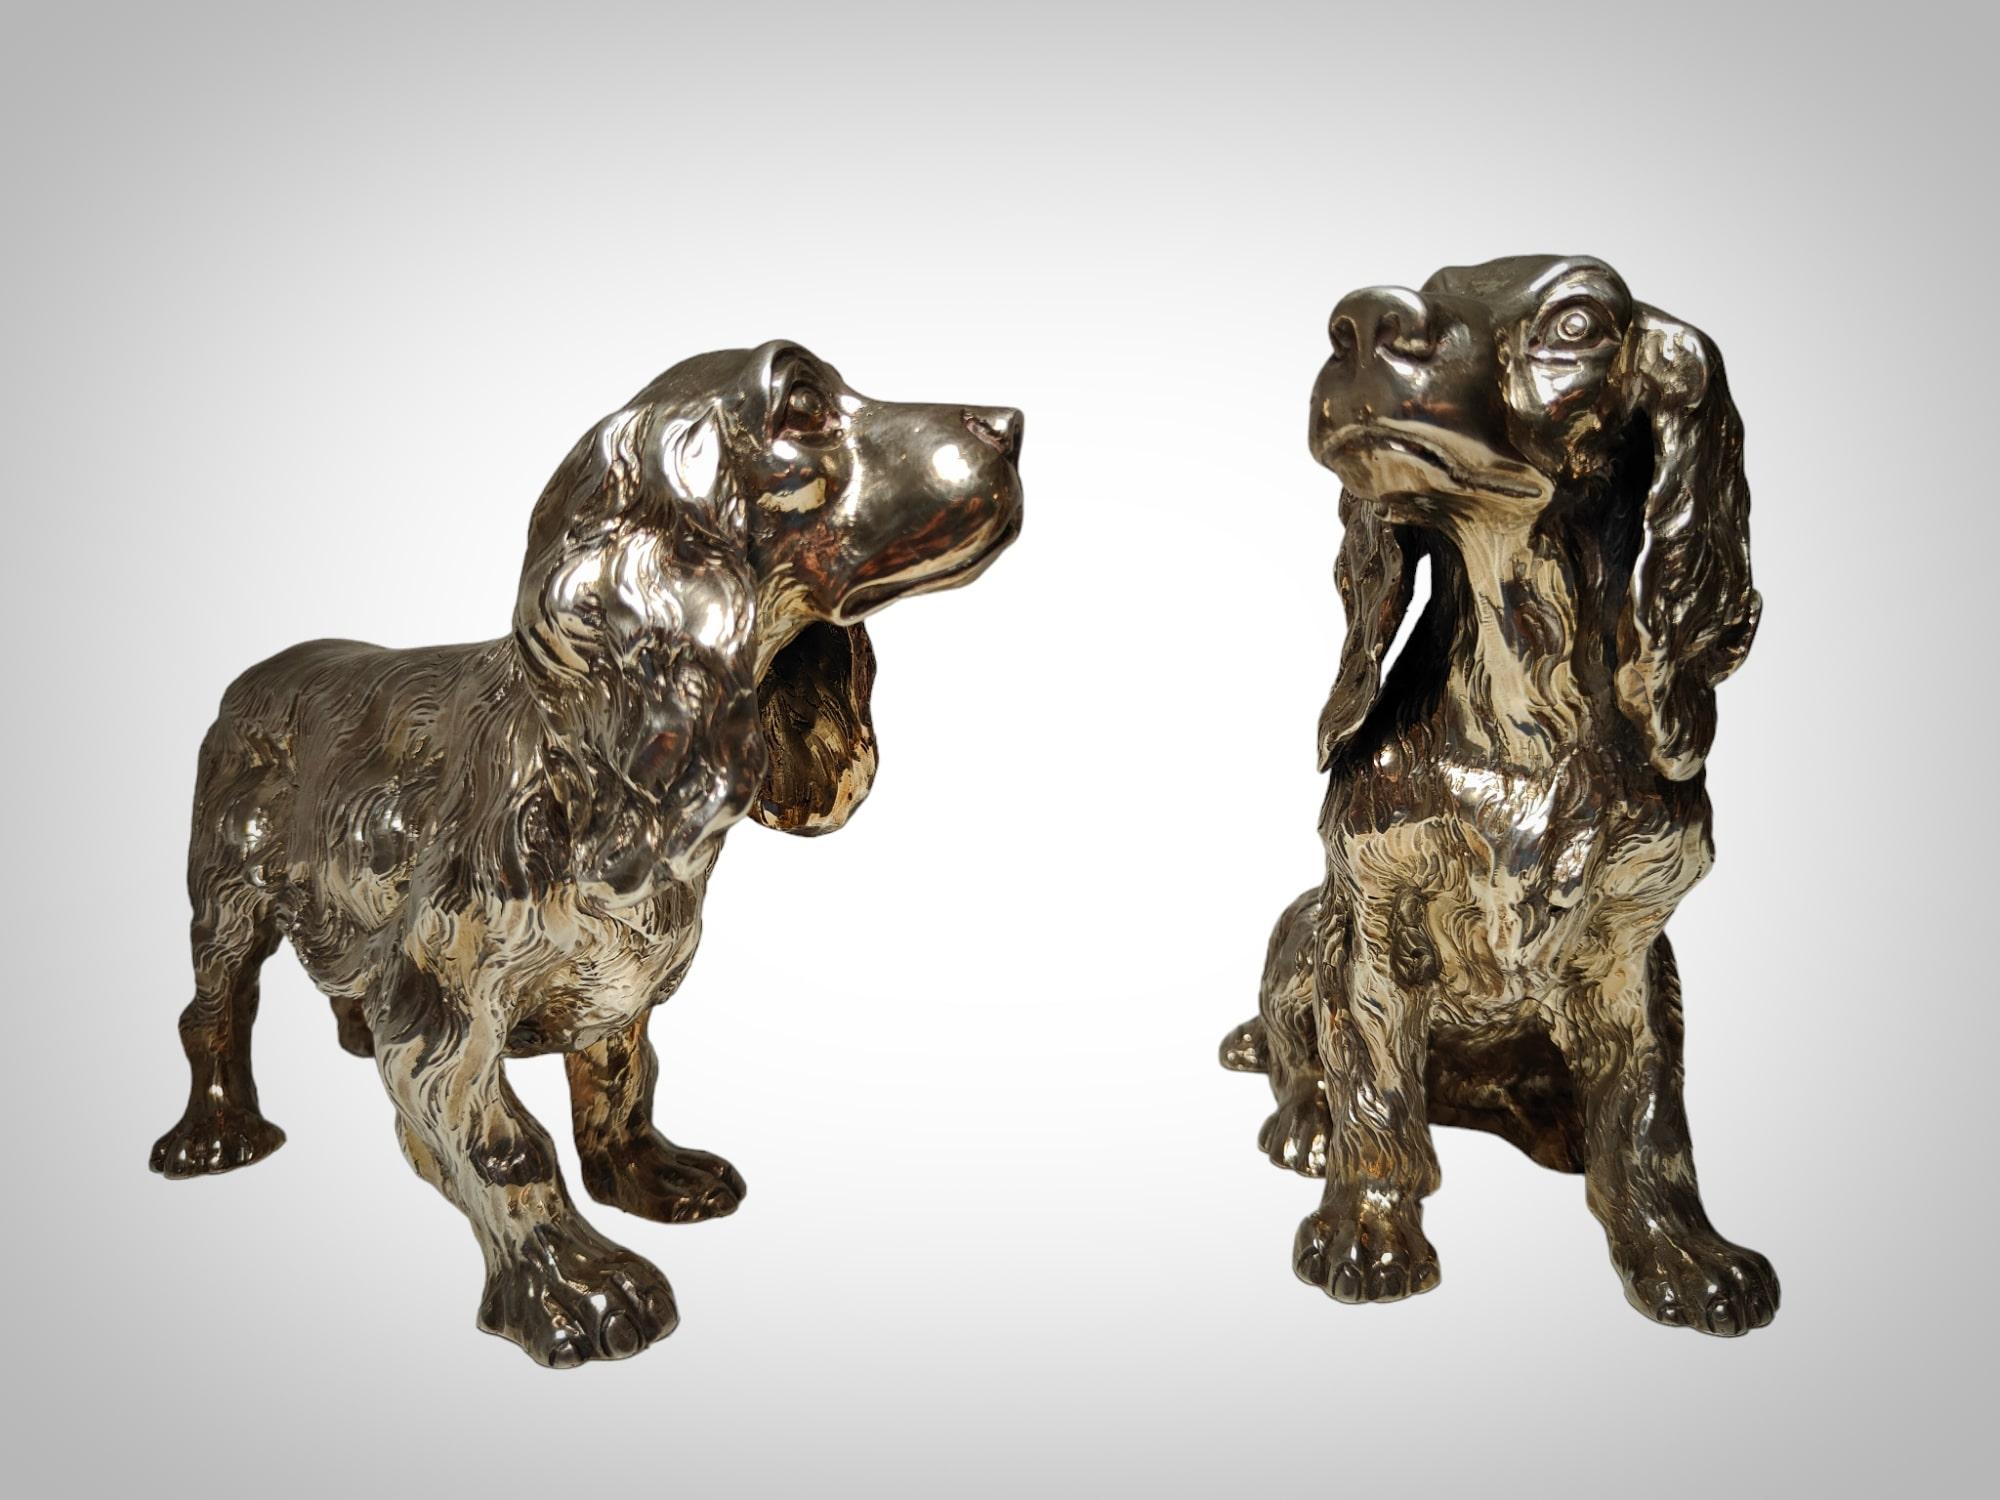 Exquisite Pair of Italian Solid Silver Cocker Spaniel Dogs For Sale 4